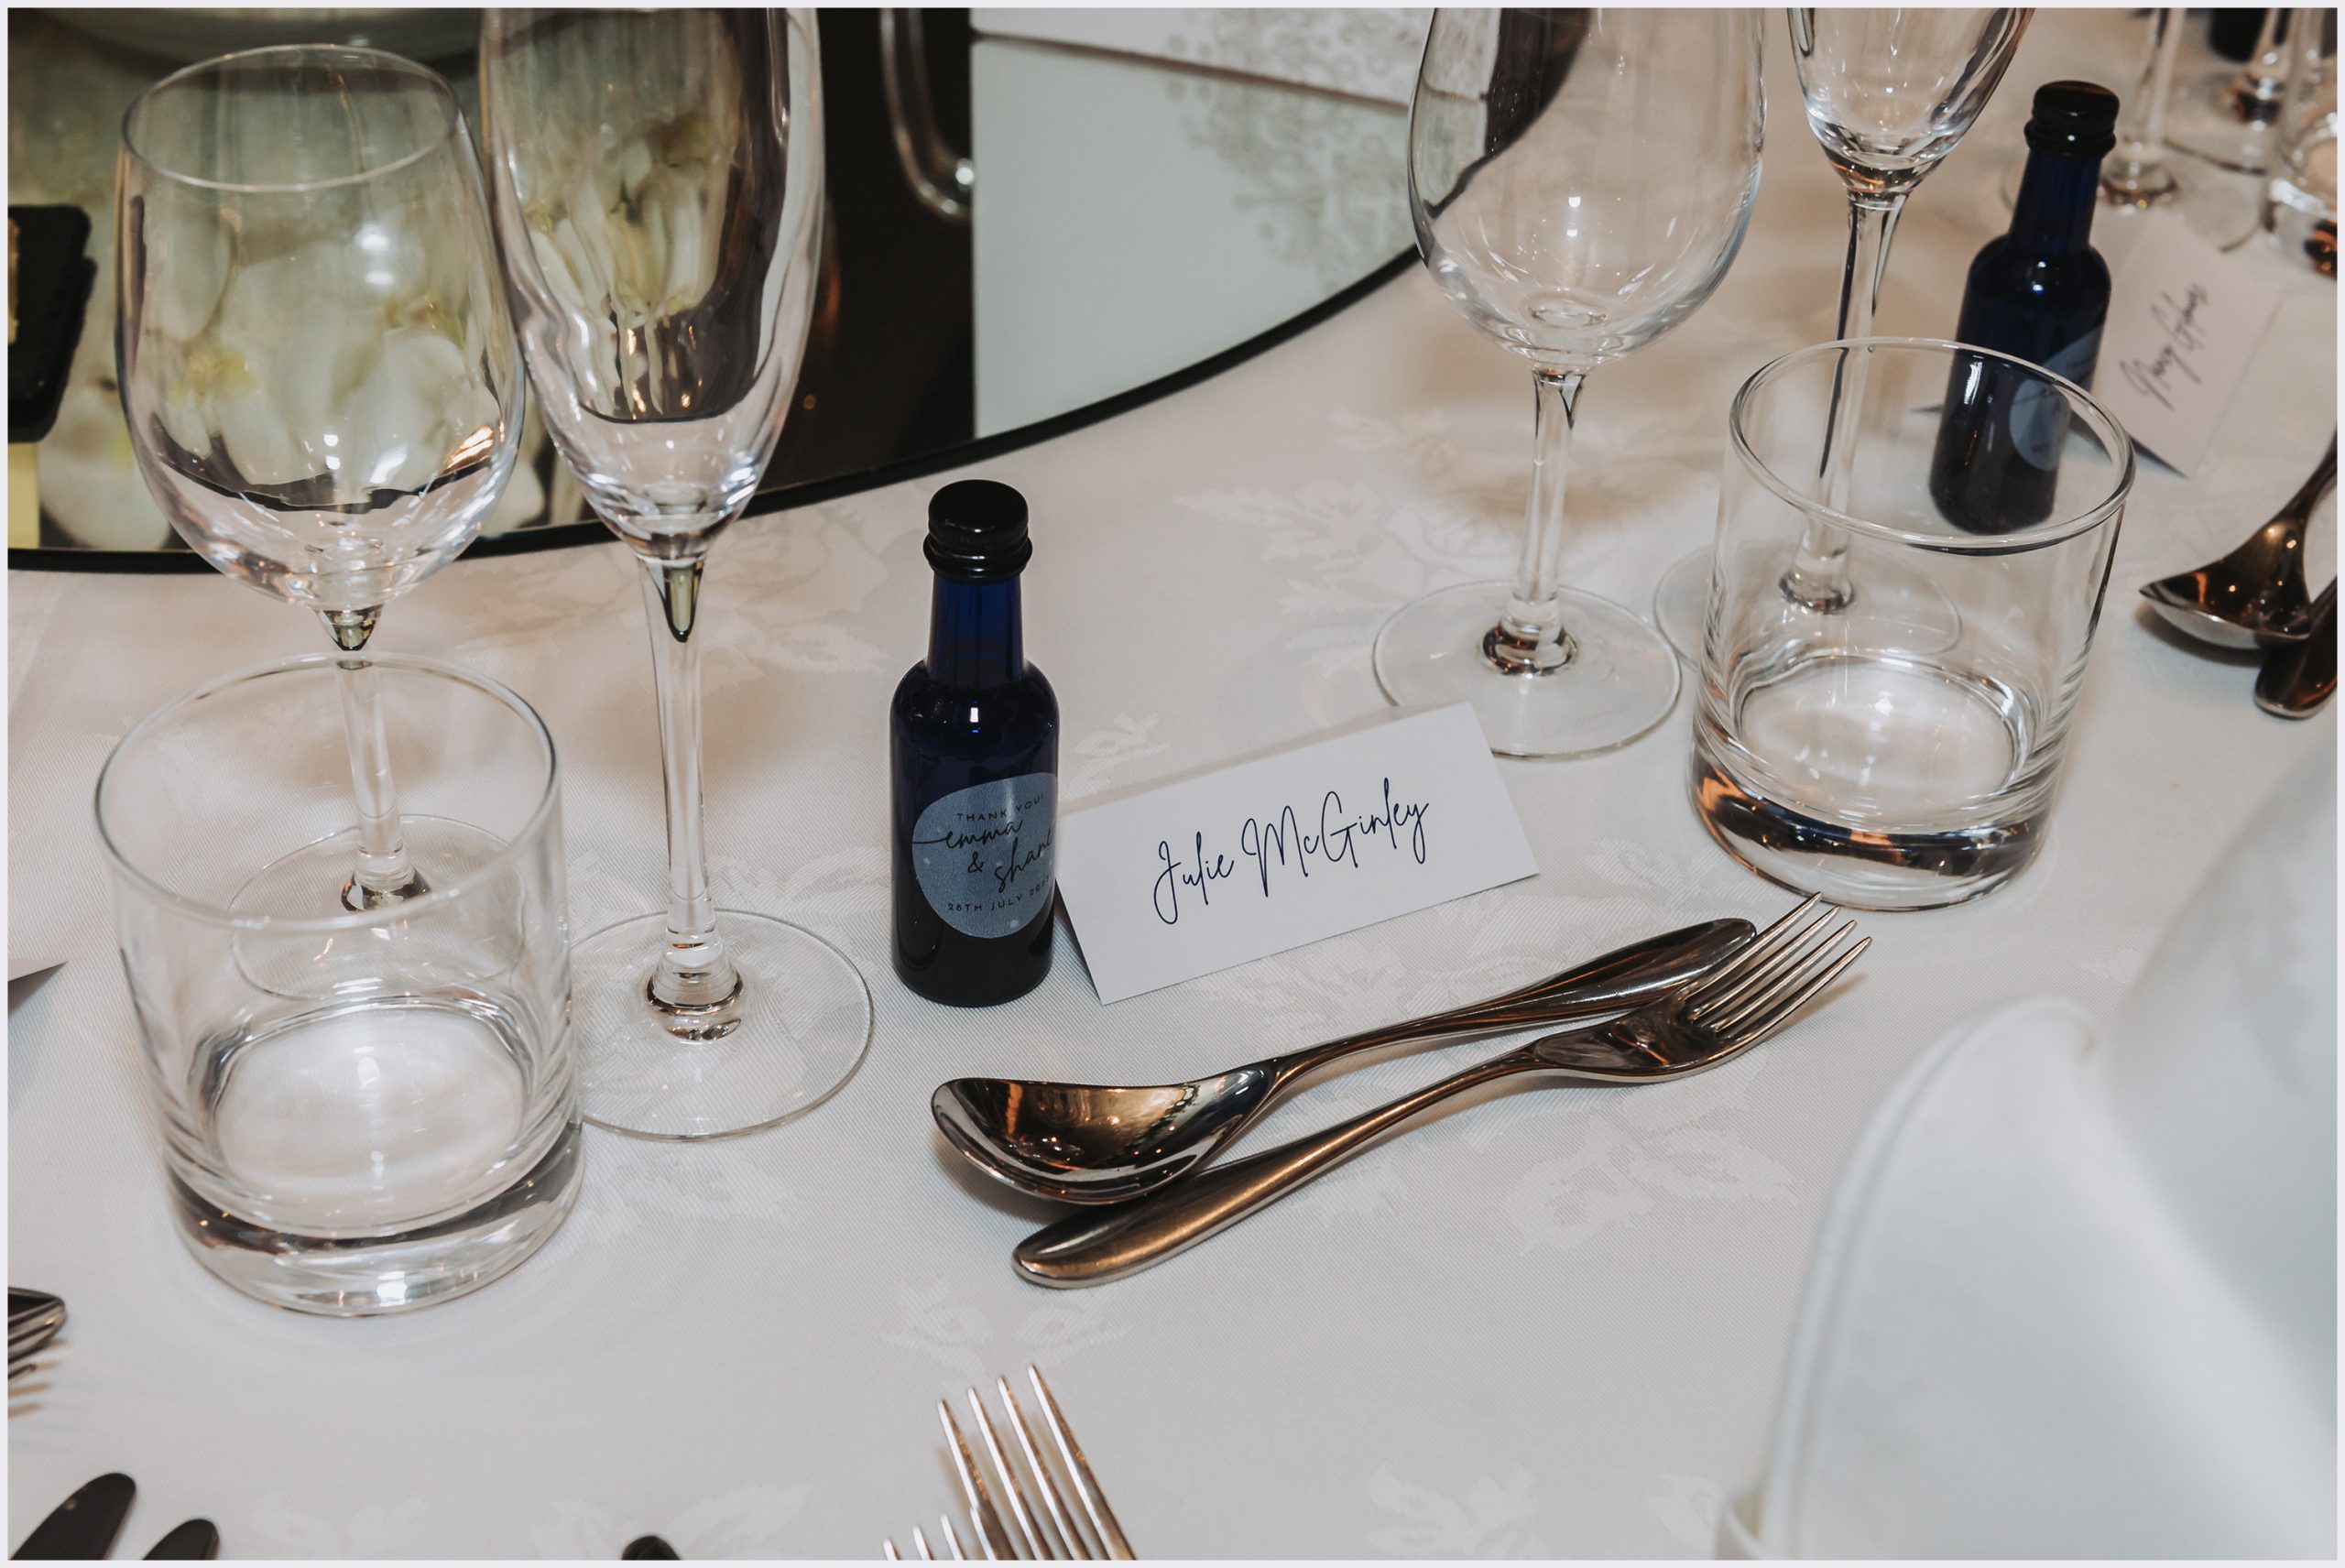 A guest's wedding breakfast place setting at The Grosvenor Pulford Hotel and Spa